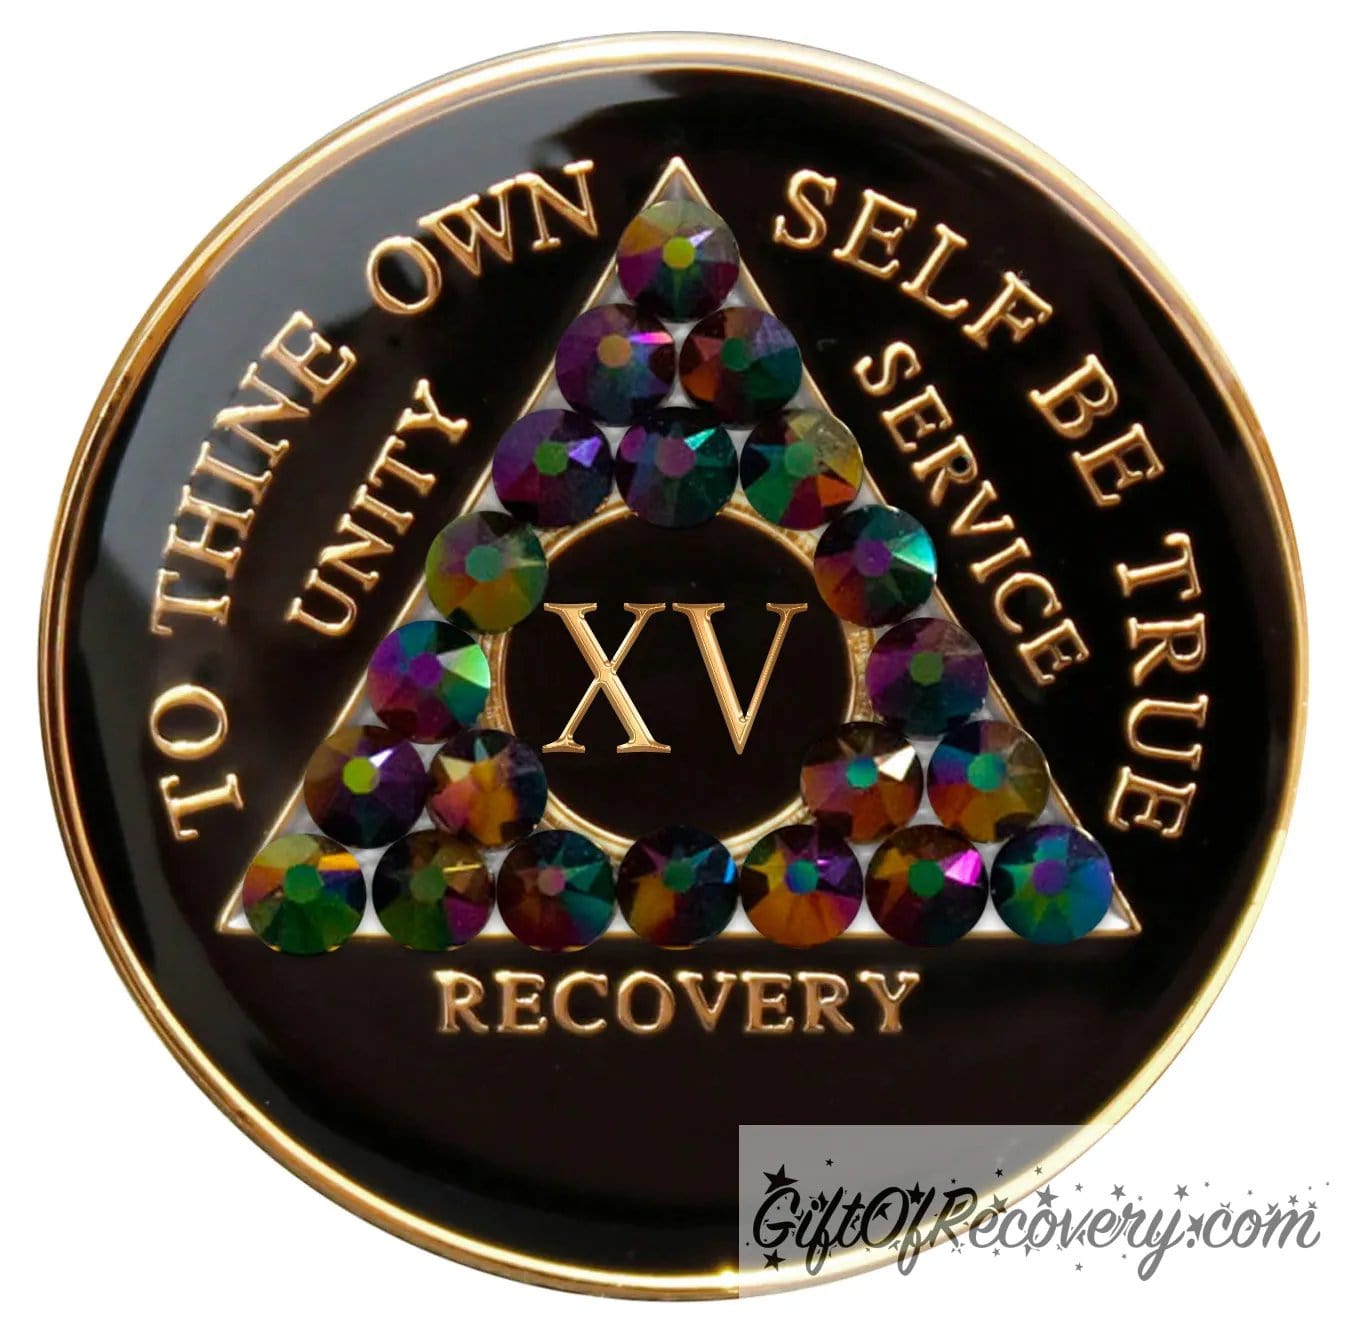 15 year black onyx AA recovery medallion, with 21 genuine peacock crystals, symbolizing the beauty and diversity of recovery journeys, the AA medallion has; to thine own self be true, unity, service, recovery, roman numeral, and the rim, embossed with 14k gold and sealed with resin for a glossy finish.